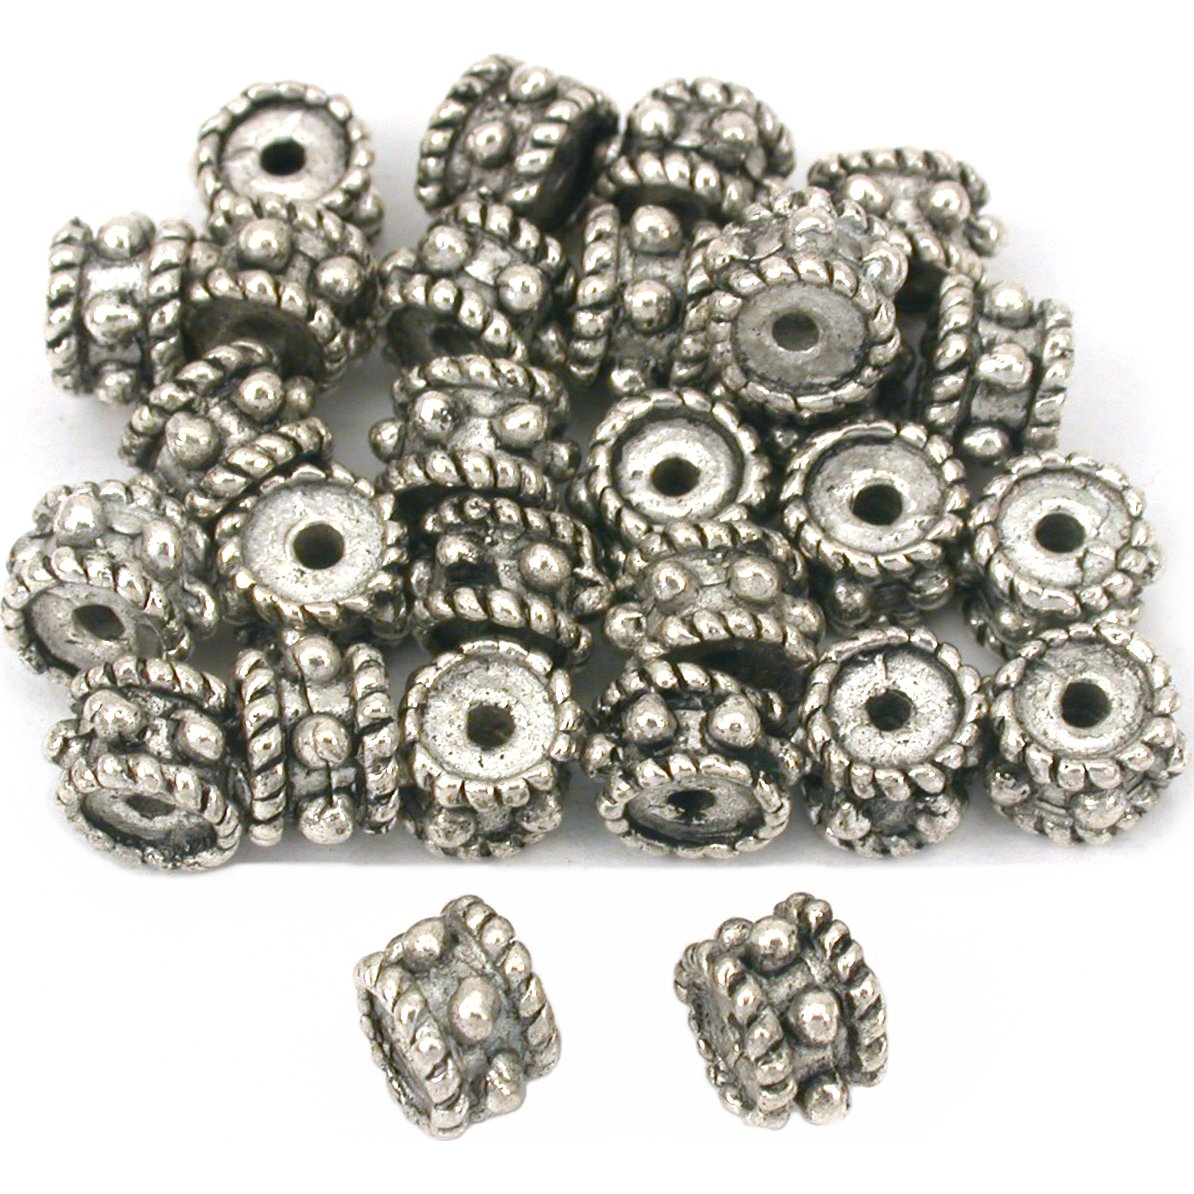 Bali Spacer Rope Beads Antique Silver Plated 6mm 25Pcs Approx.